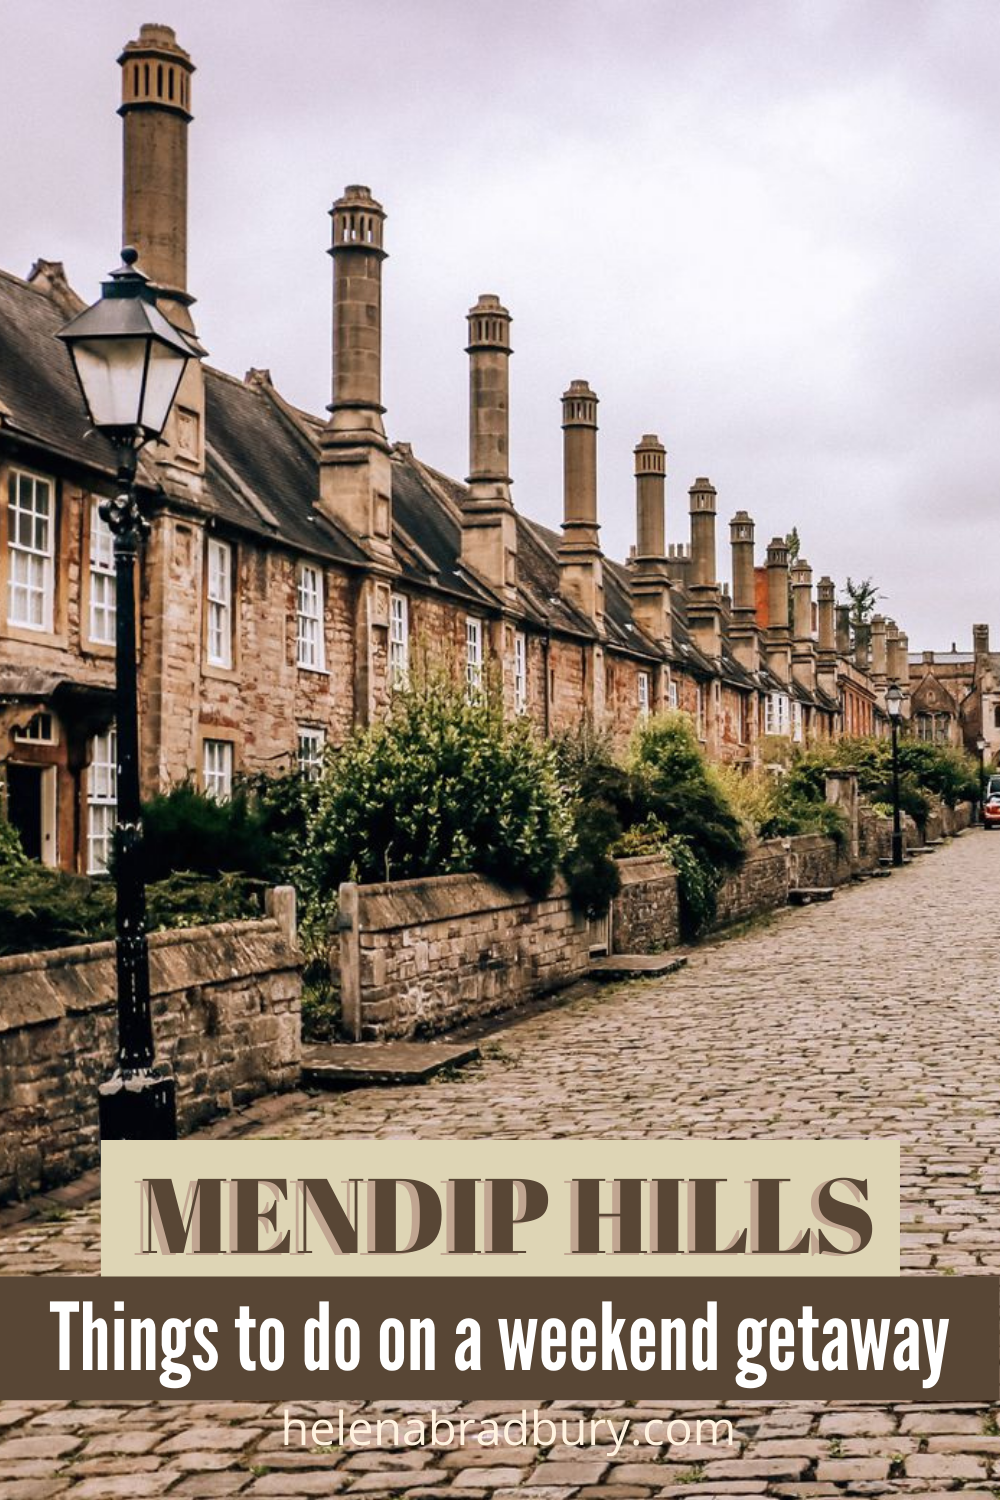 The Mendip Hills in Somerset are an underrated destination in the UK but are perfect for a UK weekend getaway. Use this guide to plan things to do in the Mendips | Helena Bradbury travel blog | uk travel destinations beautiful places | somerset engl…